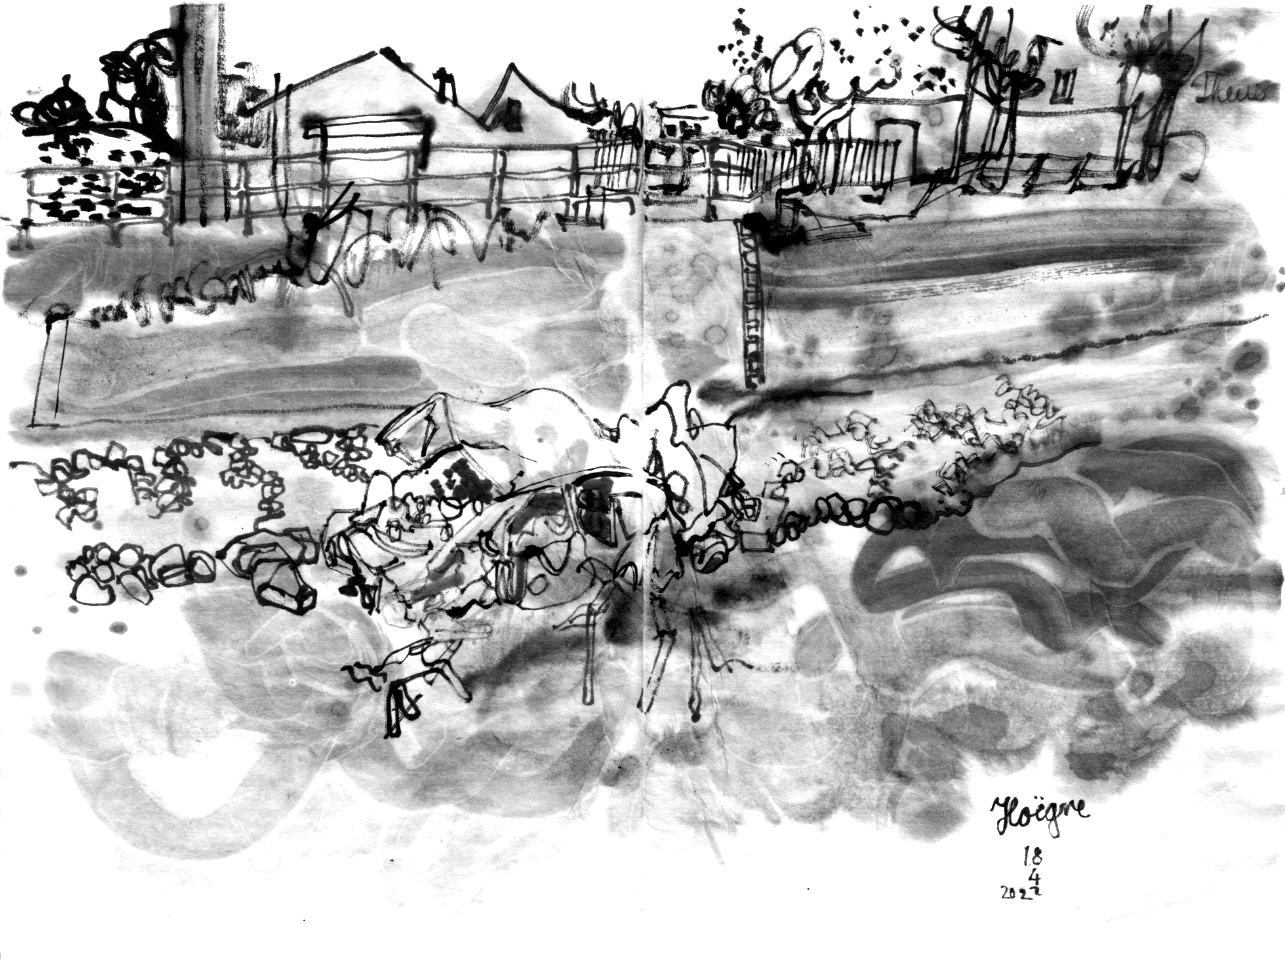 ink drawing of a river, debris and a wrecked car (filled with debris) in ther river, 